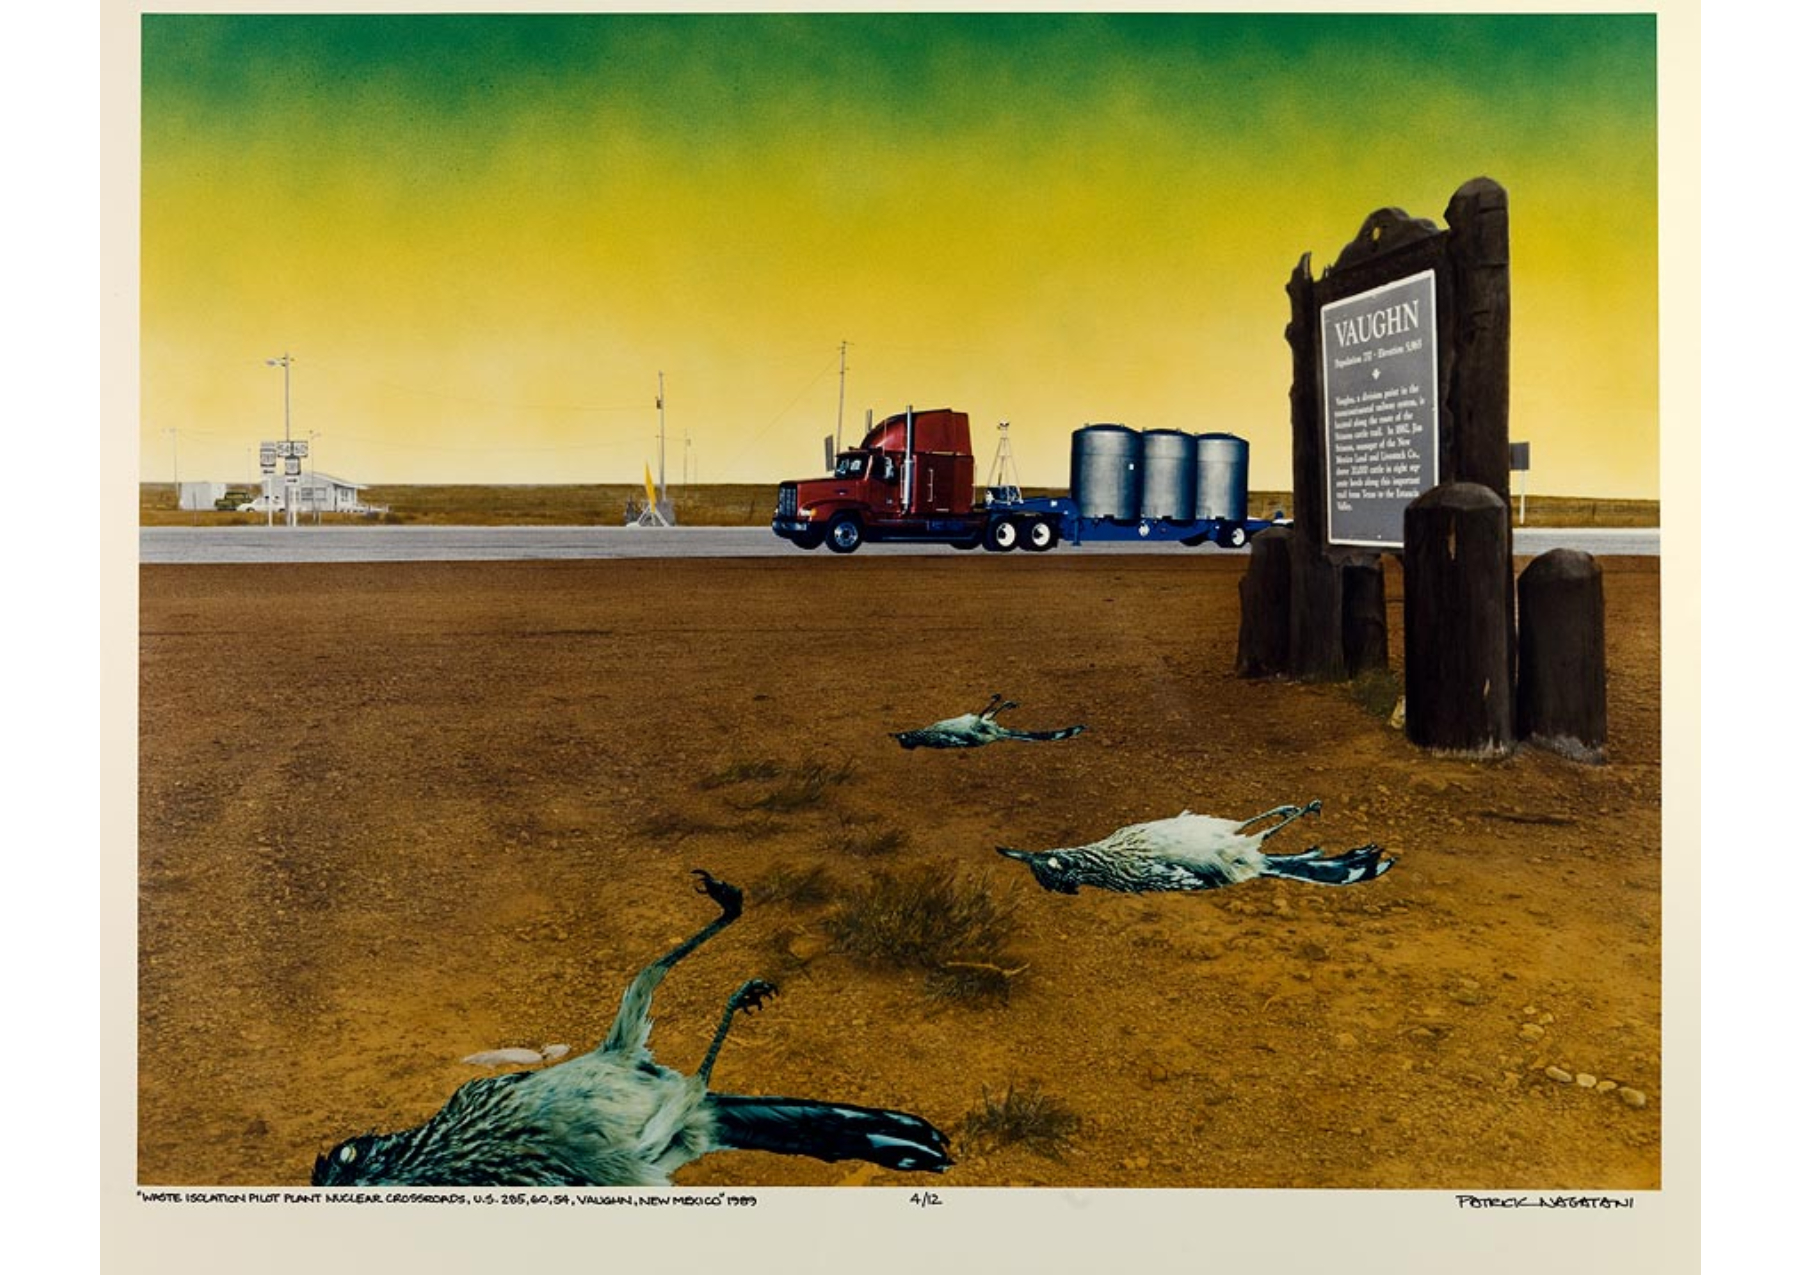 Exterior, large, empty, flat dirt landscape with yellow and green sky, three dead birds overlaid on foreground, sign for Vaughn at right, road in mid-distance with truck carrying nuclear waste, road signs and small building a mid left.